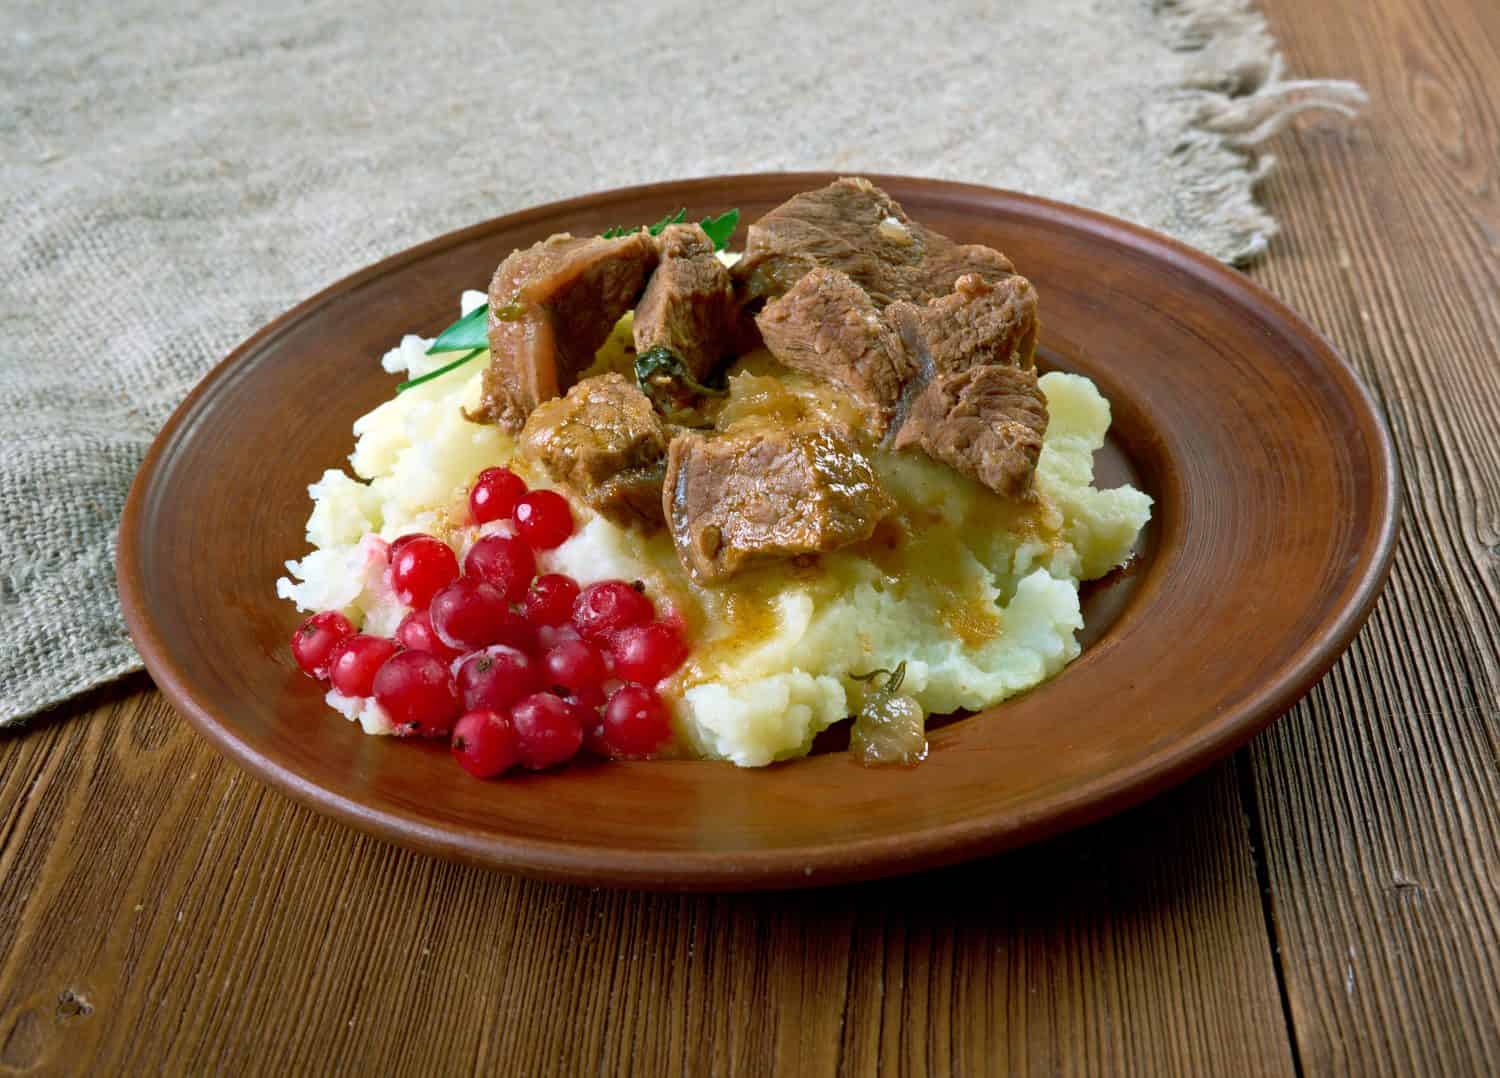 Sauteed reindeer venison steak served with mashed potatoes and lingonberry  -   traditional meal from Lapland, especially in Finland, Sweden, Norway and Russia.